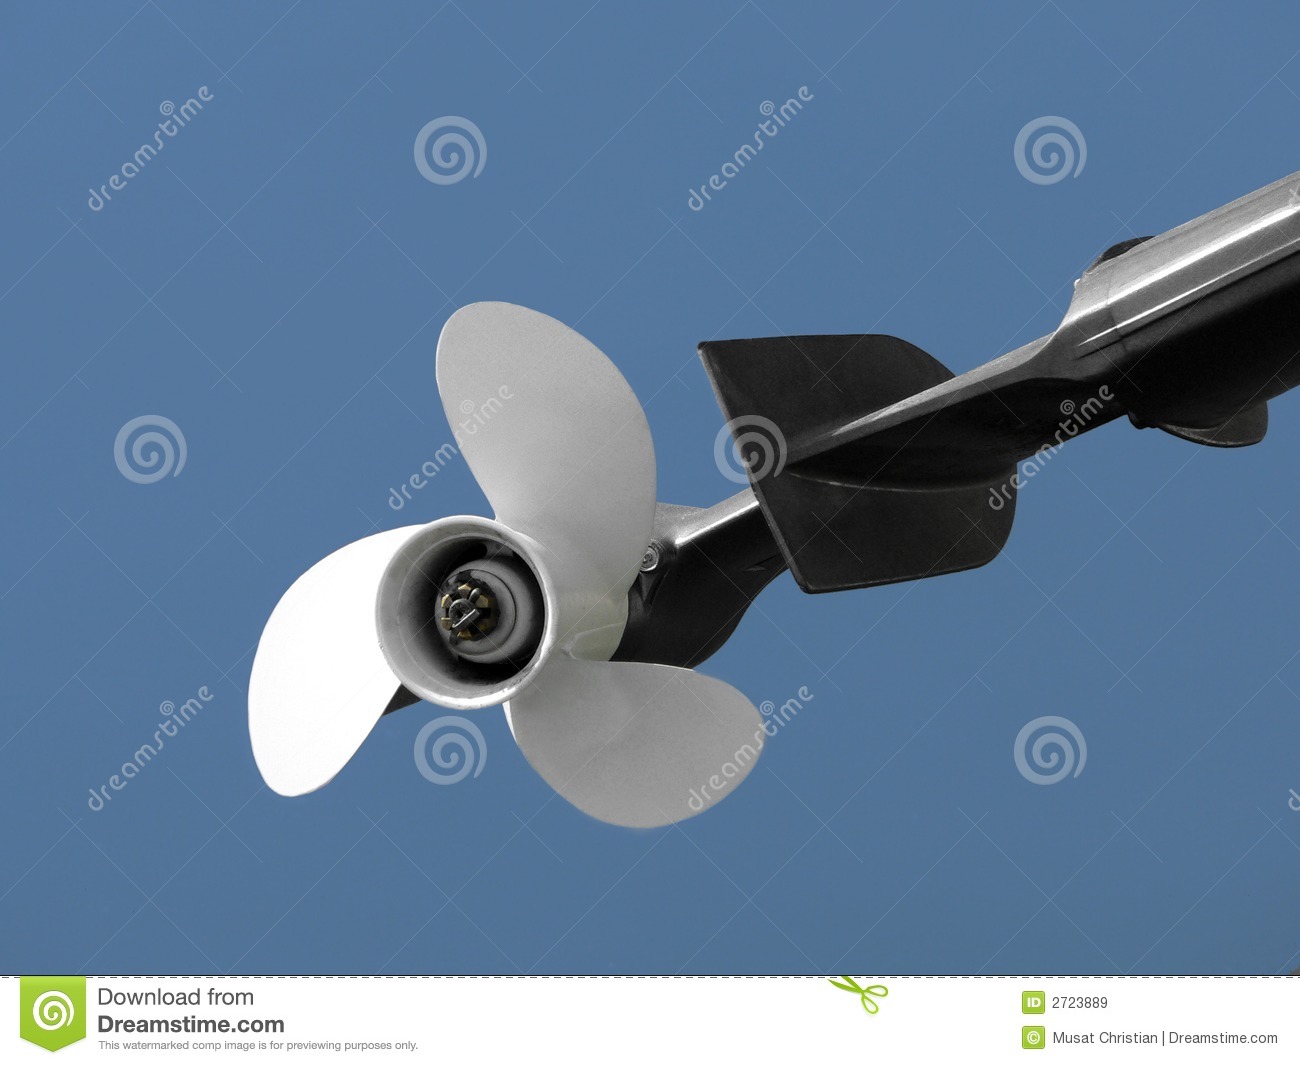 Propeller Of Boat Royalty Free Stock Images   Image  2723889